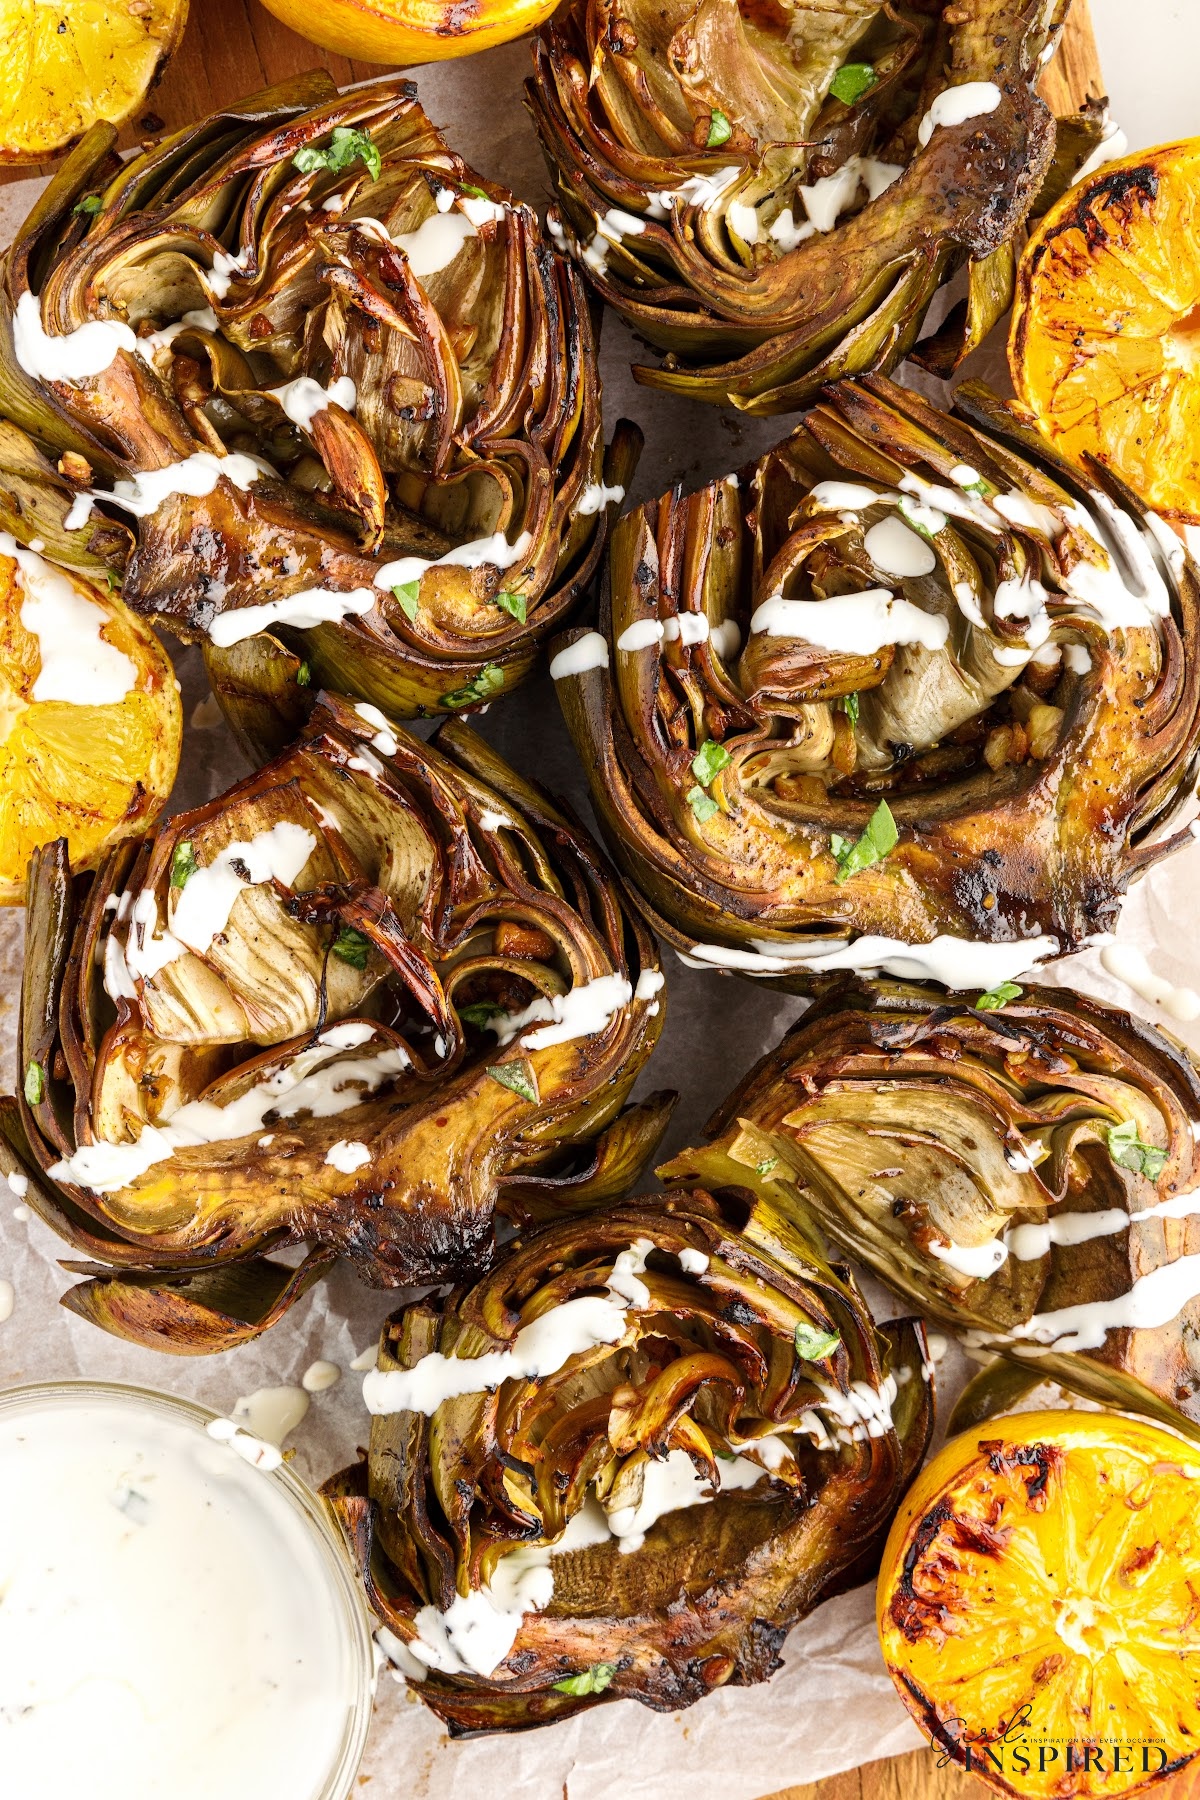 Overhead view of Grilled Artichokes next to lemon wedges and dipping sauce.